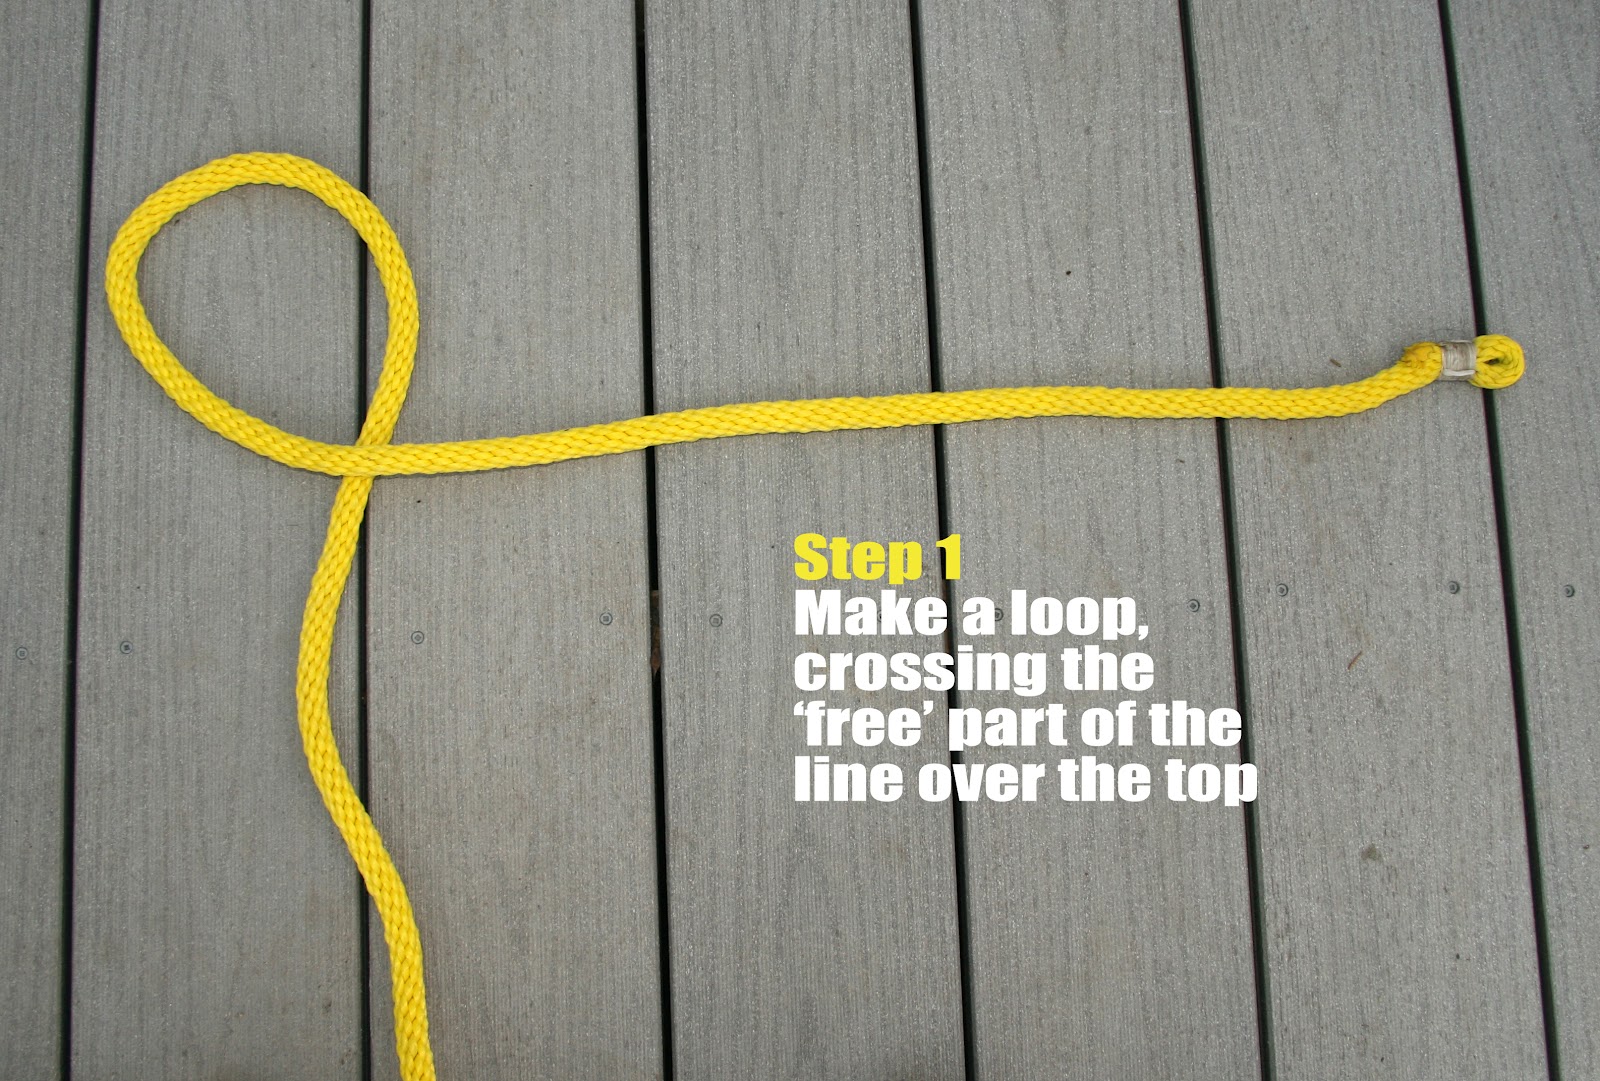 Knots 101: The bowline (AKA the only knot you REALLY need to know)